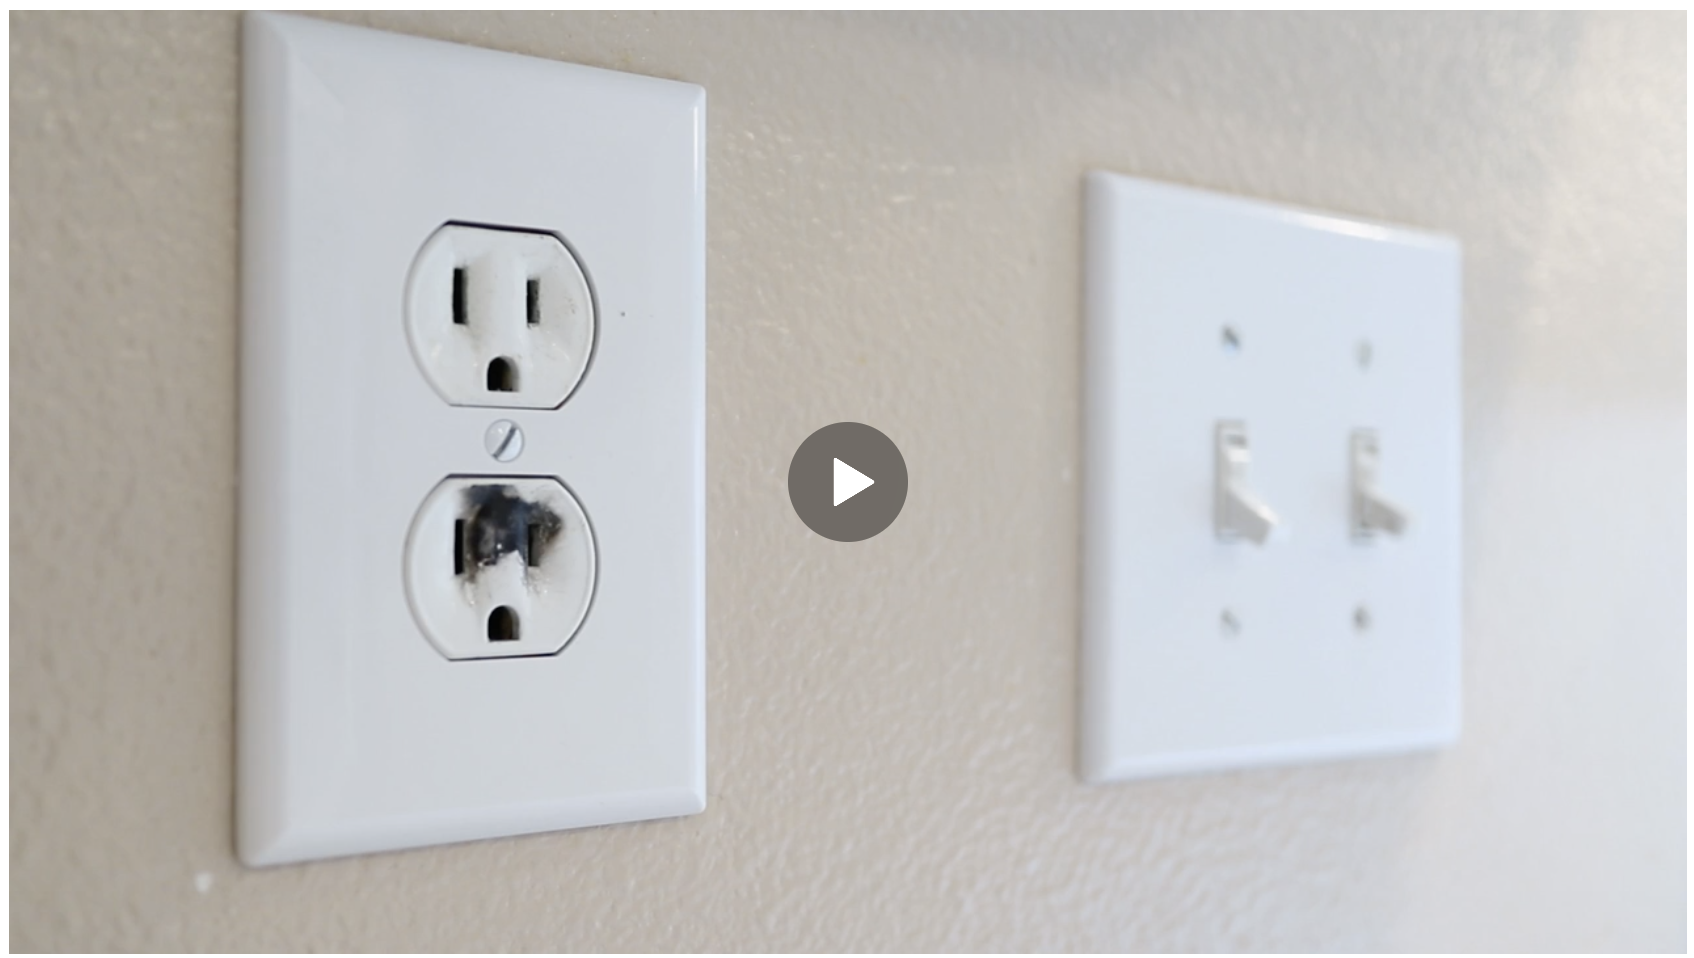 How to Replace an Electrical Outlet, Replace Burnt Out Electrical Outlet and Old Damaged Socket